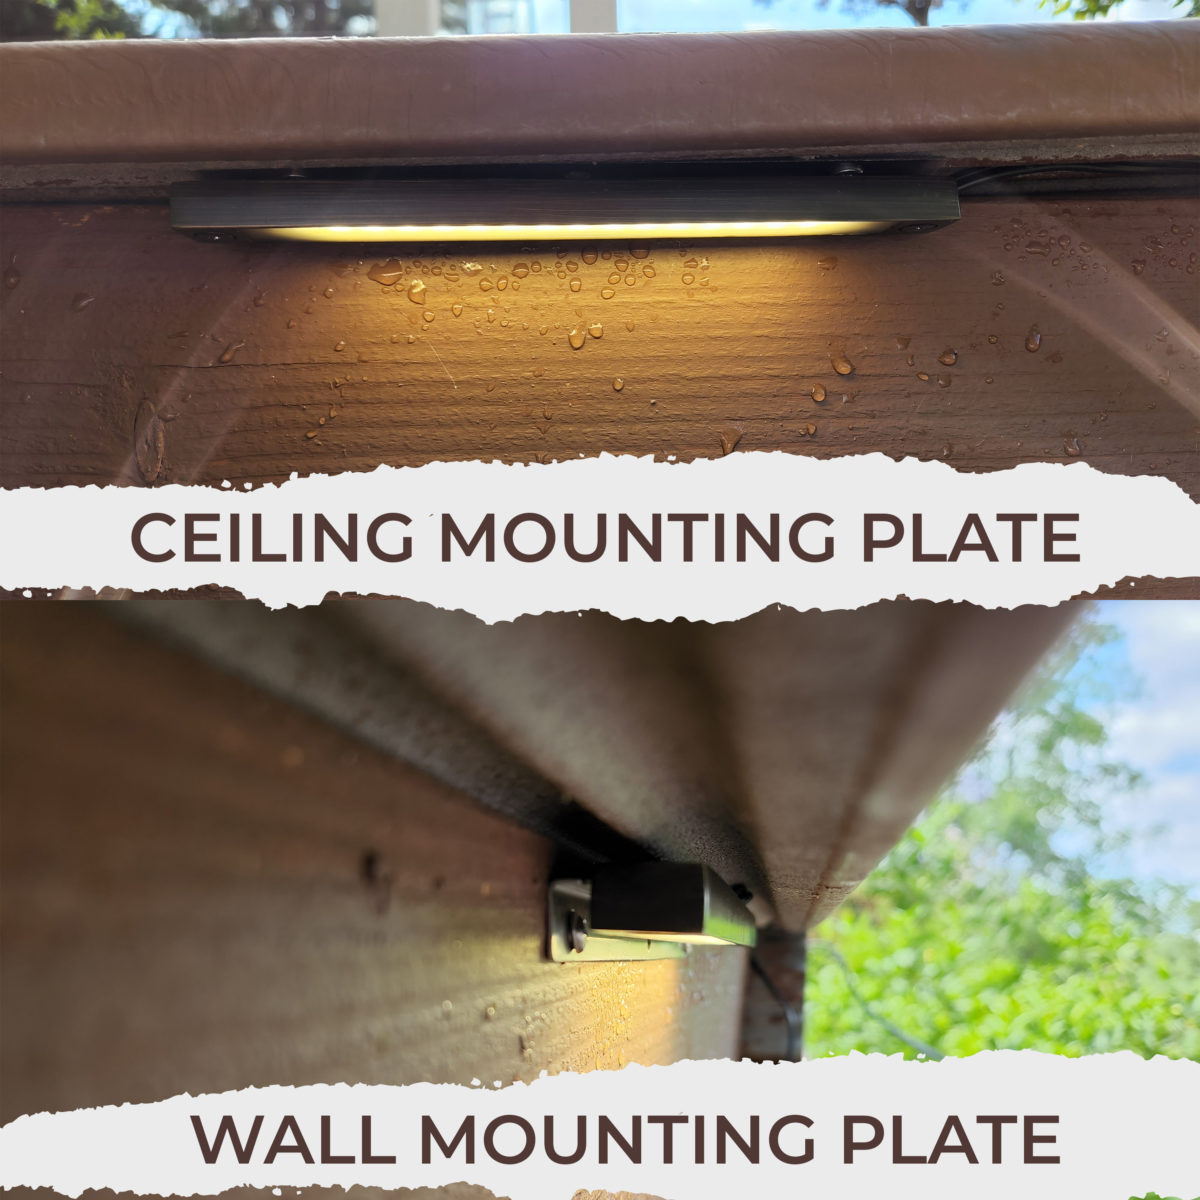 Versatile Mounting Plates - Ceiling and Wall